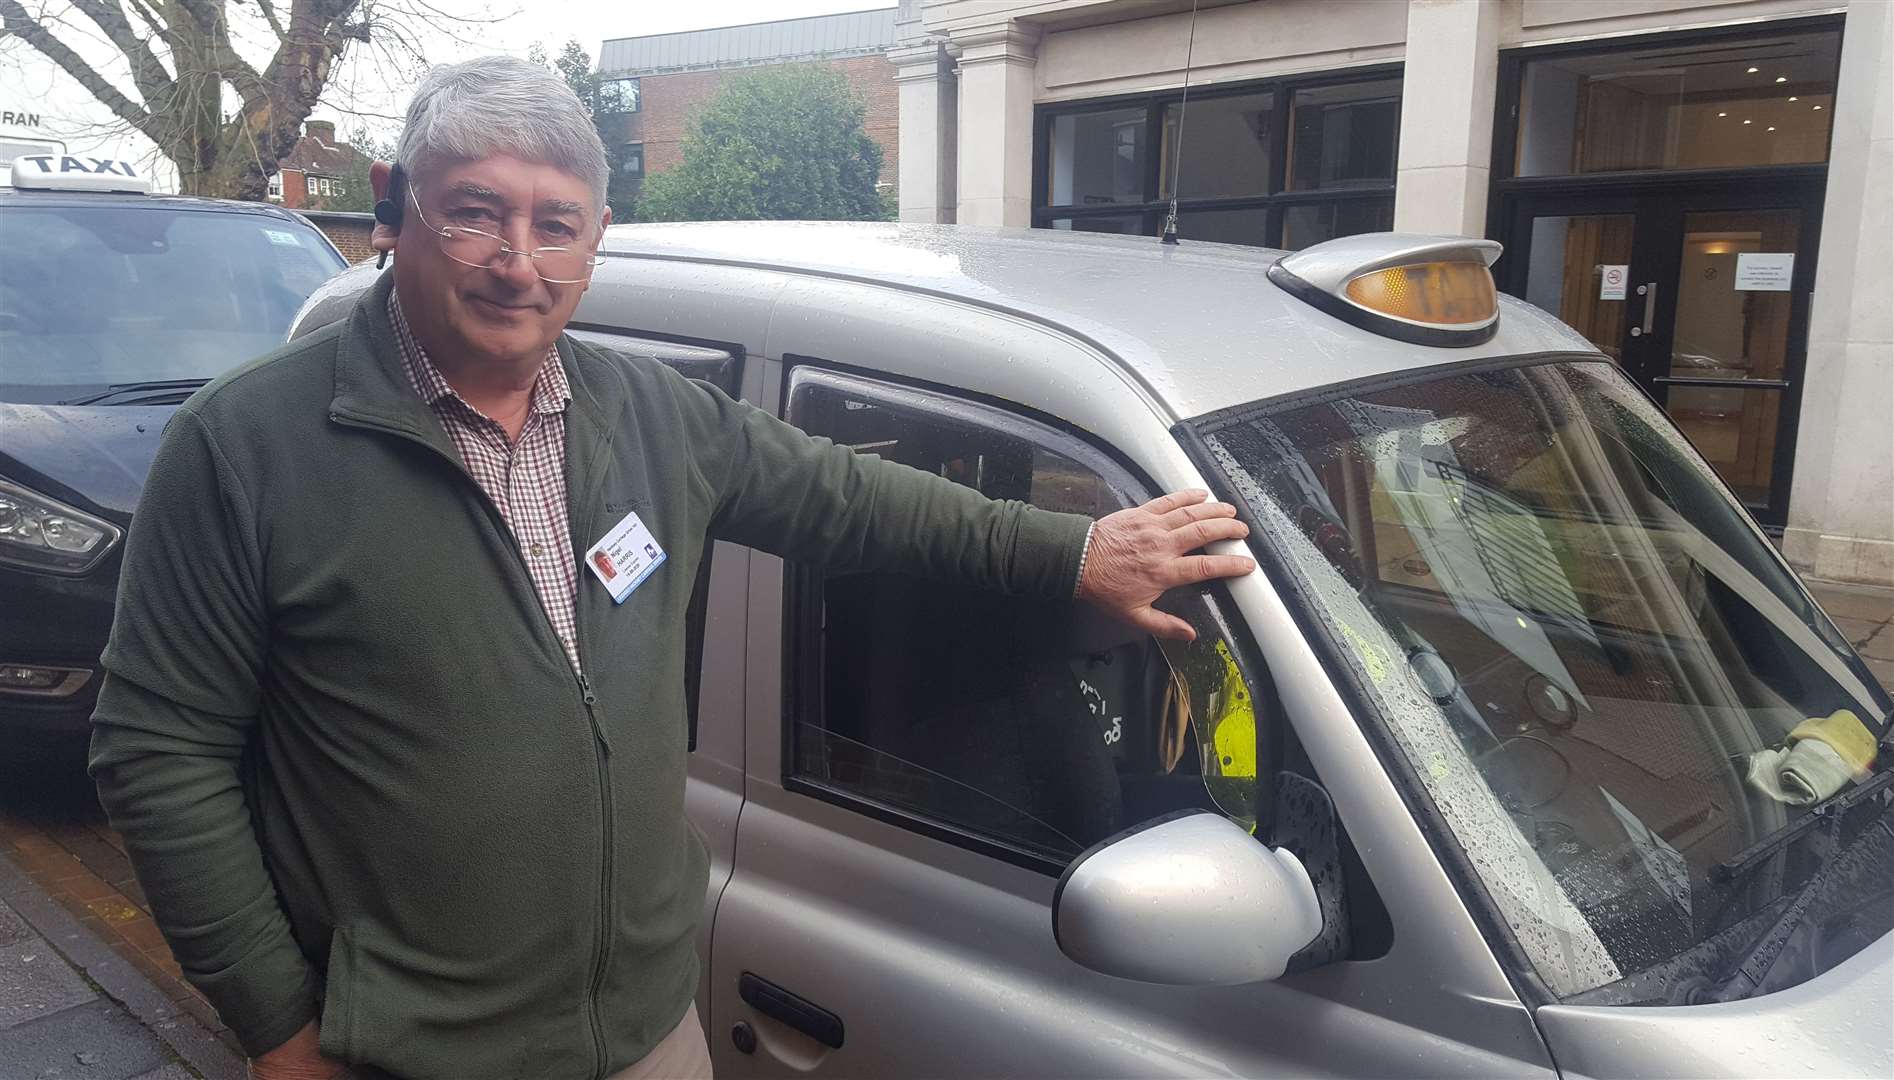 Cabbie Nigel Harris says his vehicle will be too old to meet the requirements